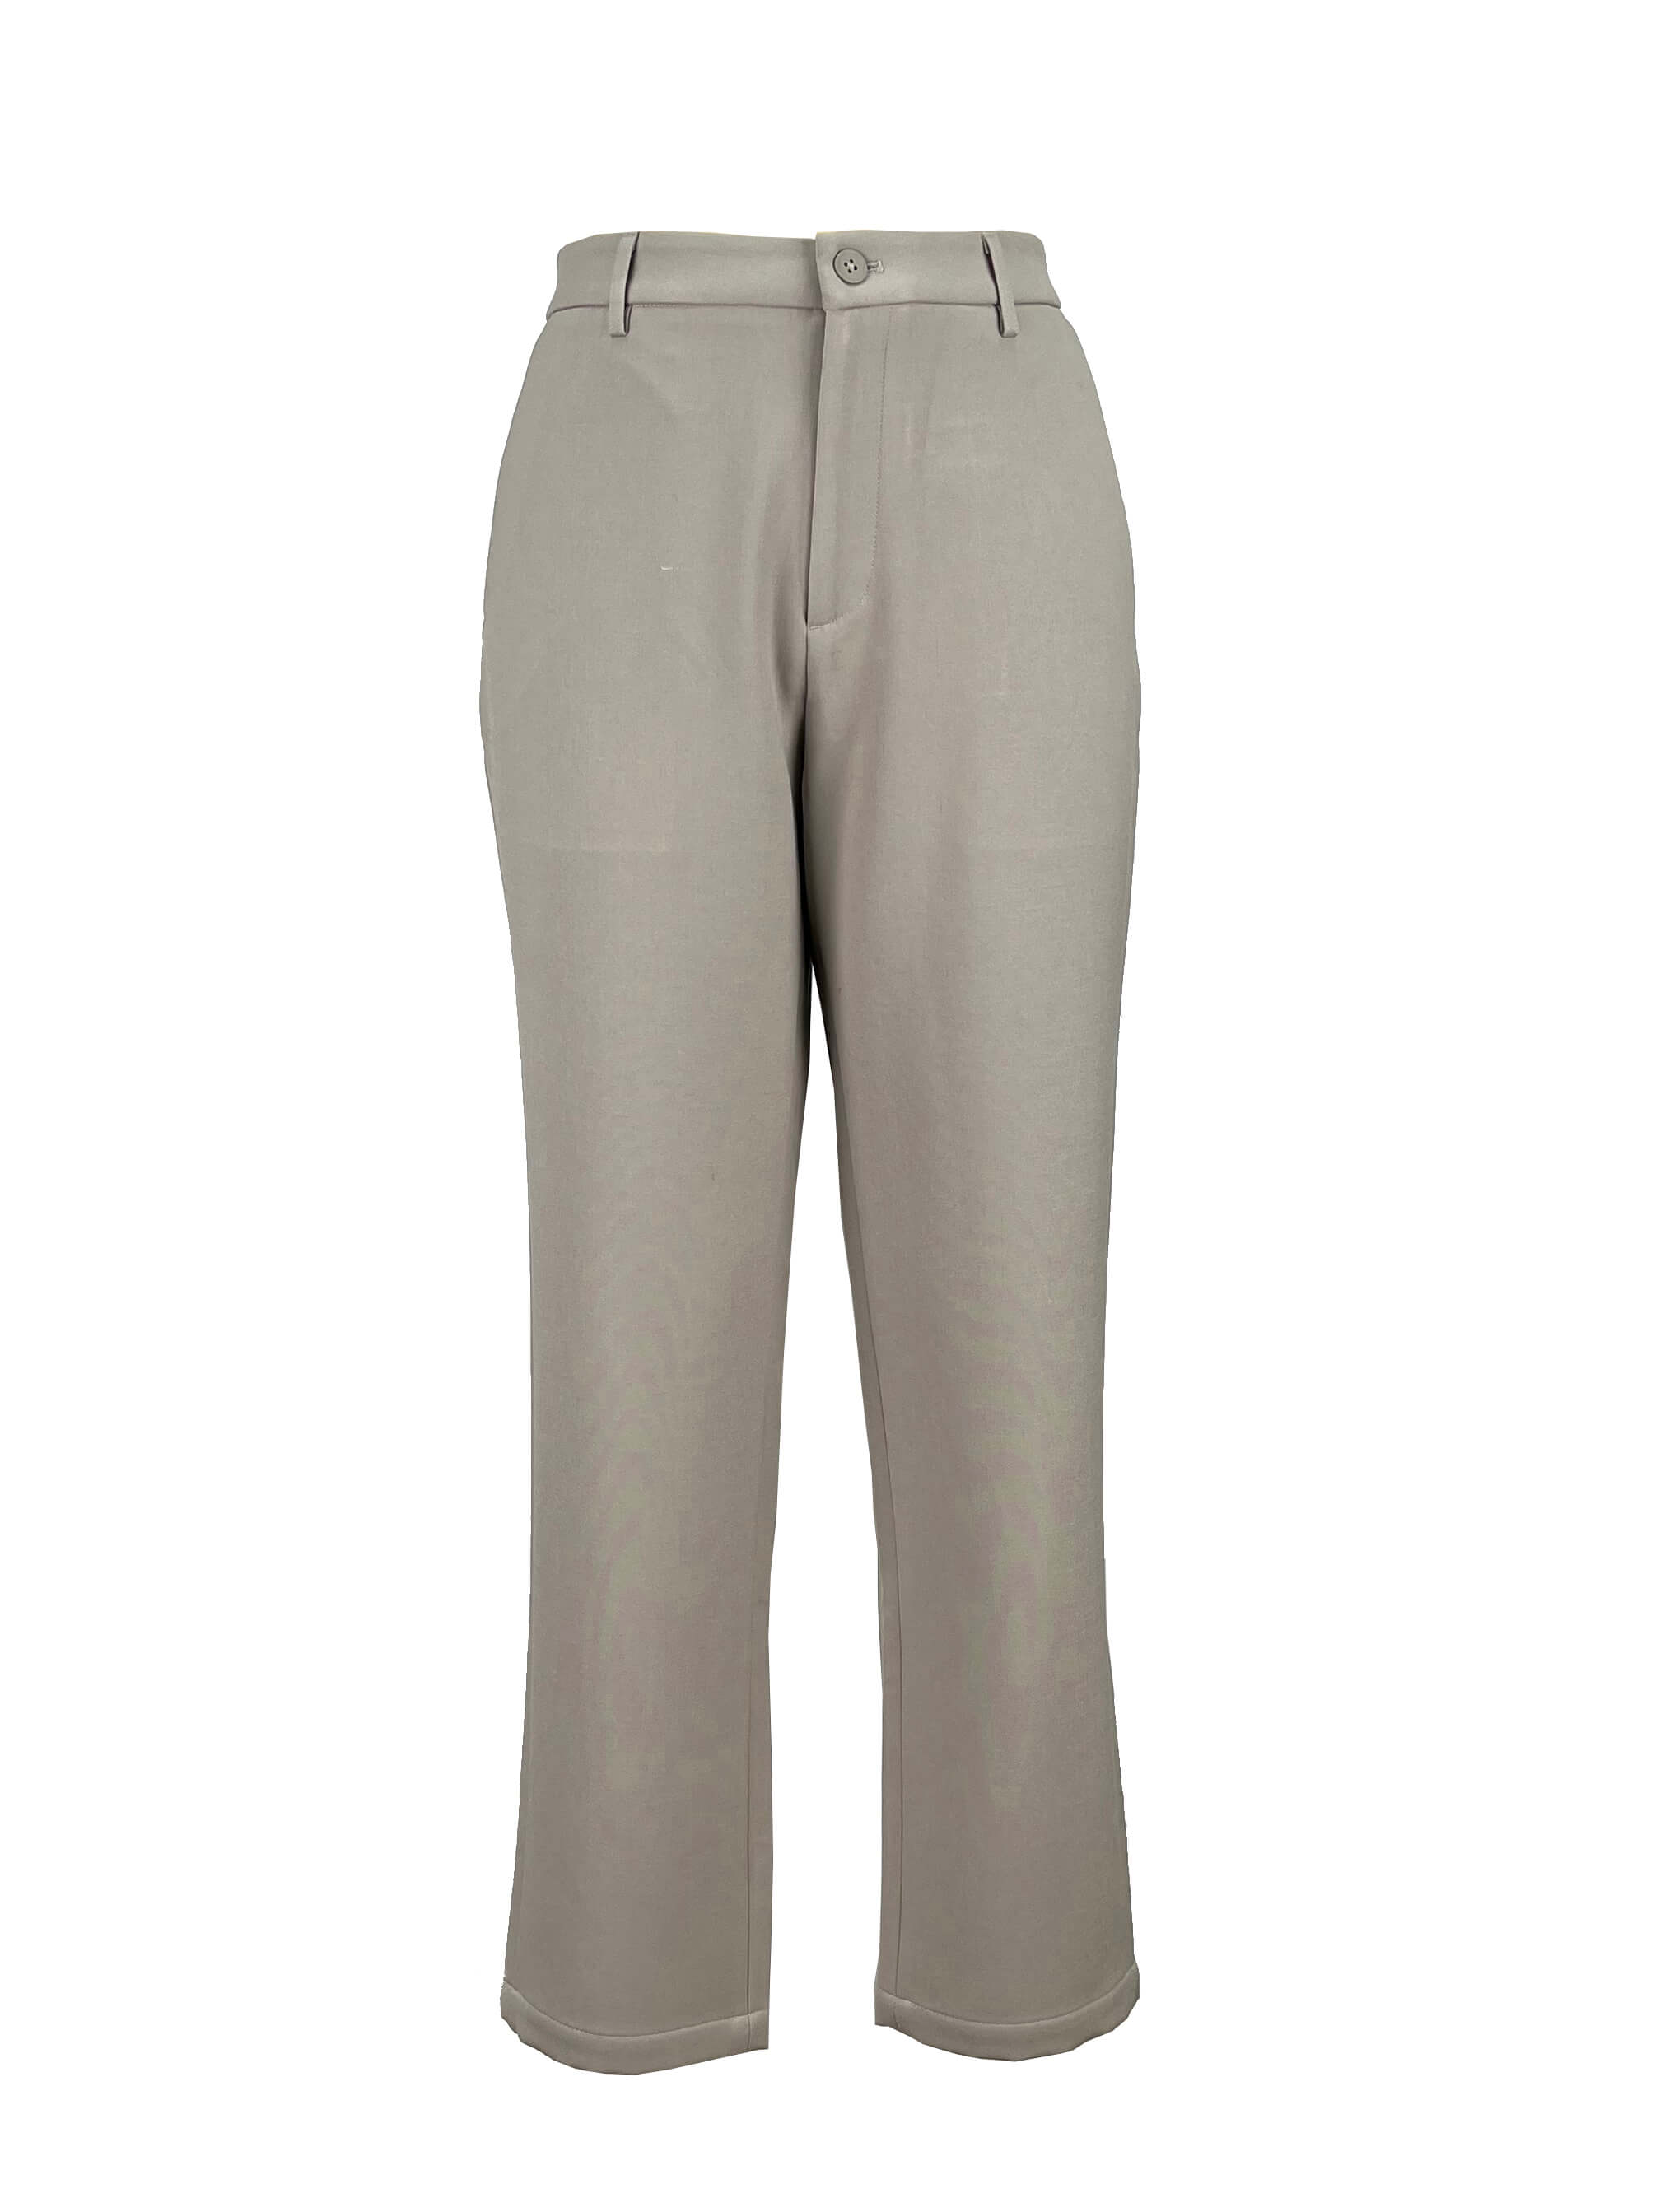 8.trousers (1)